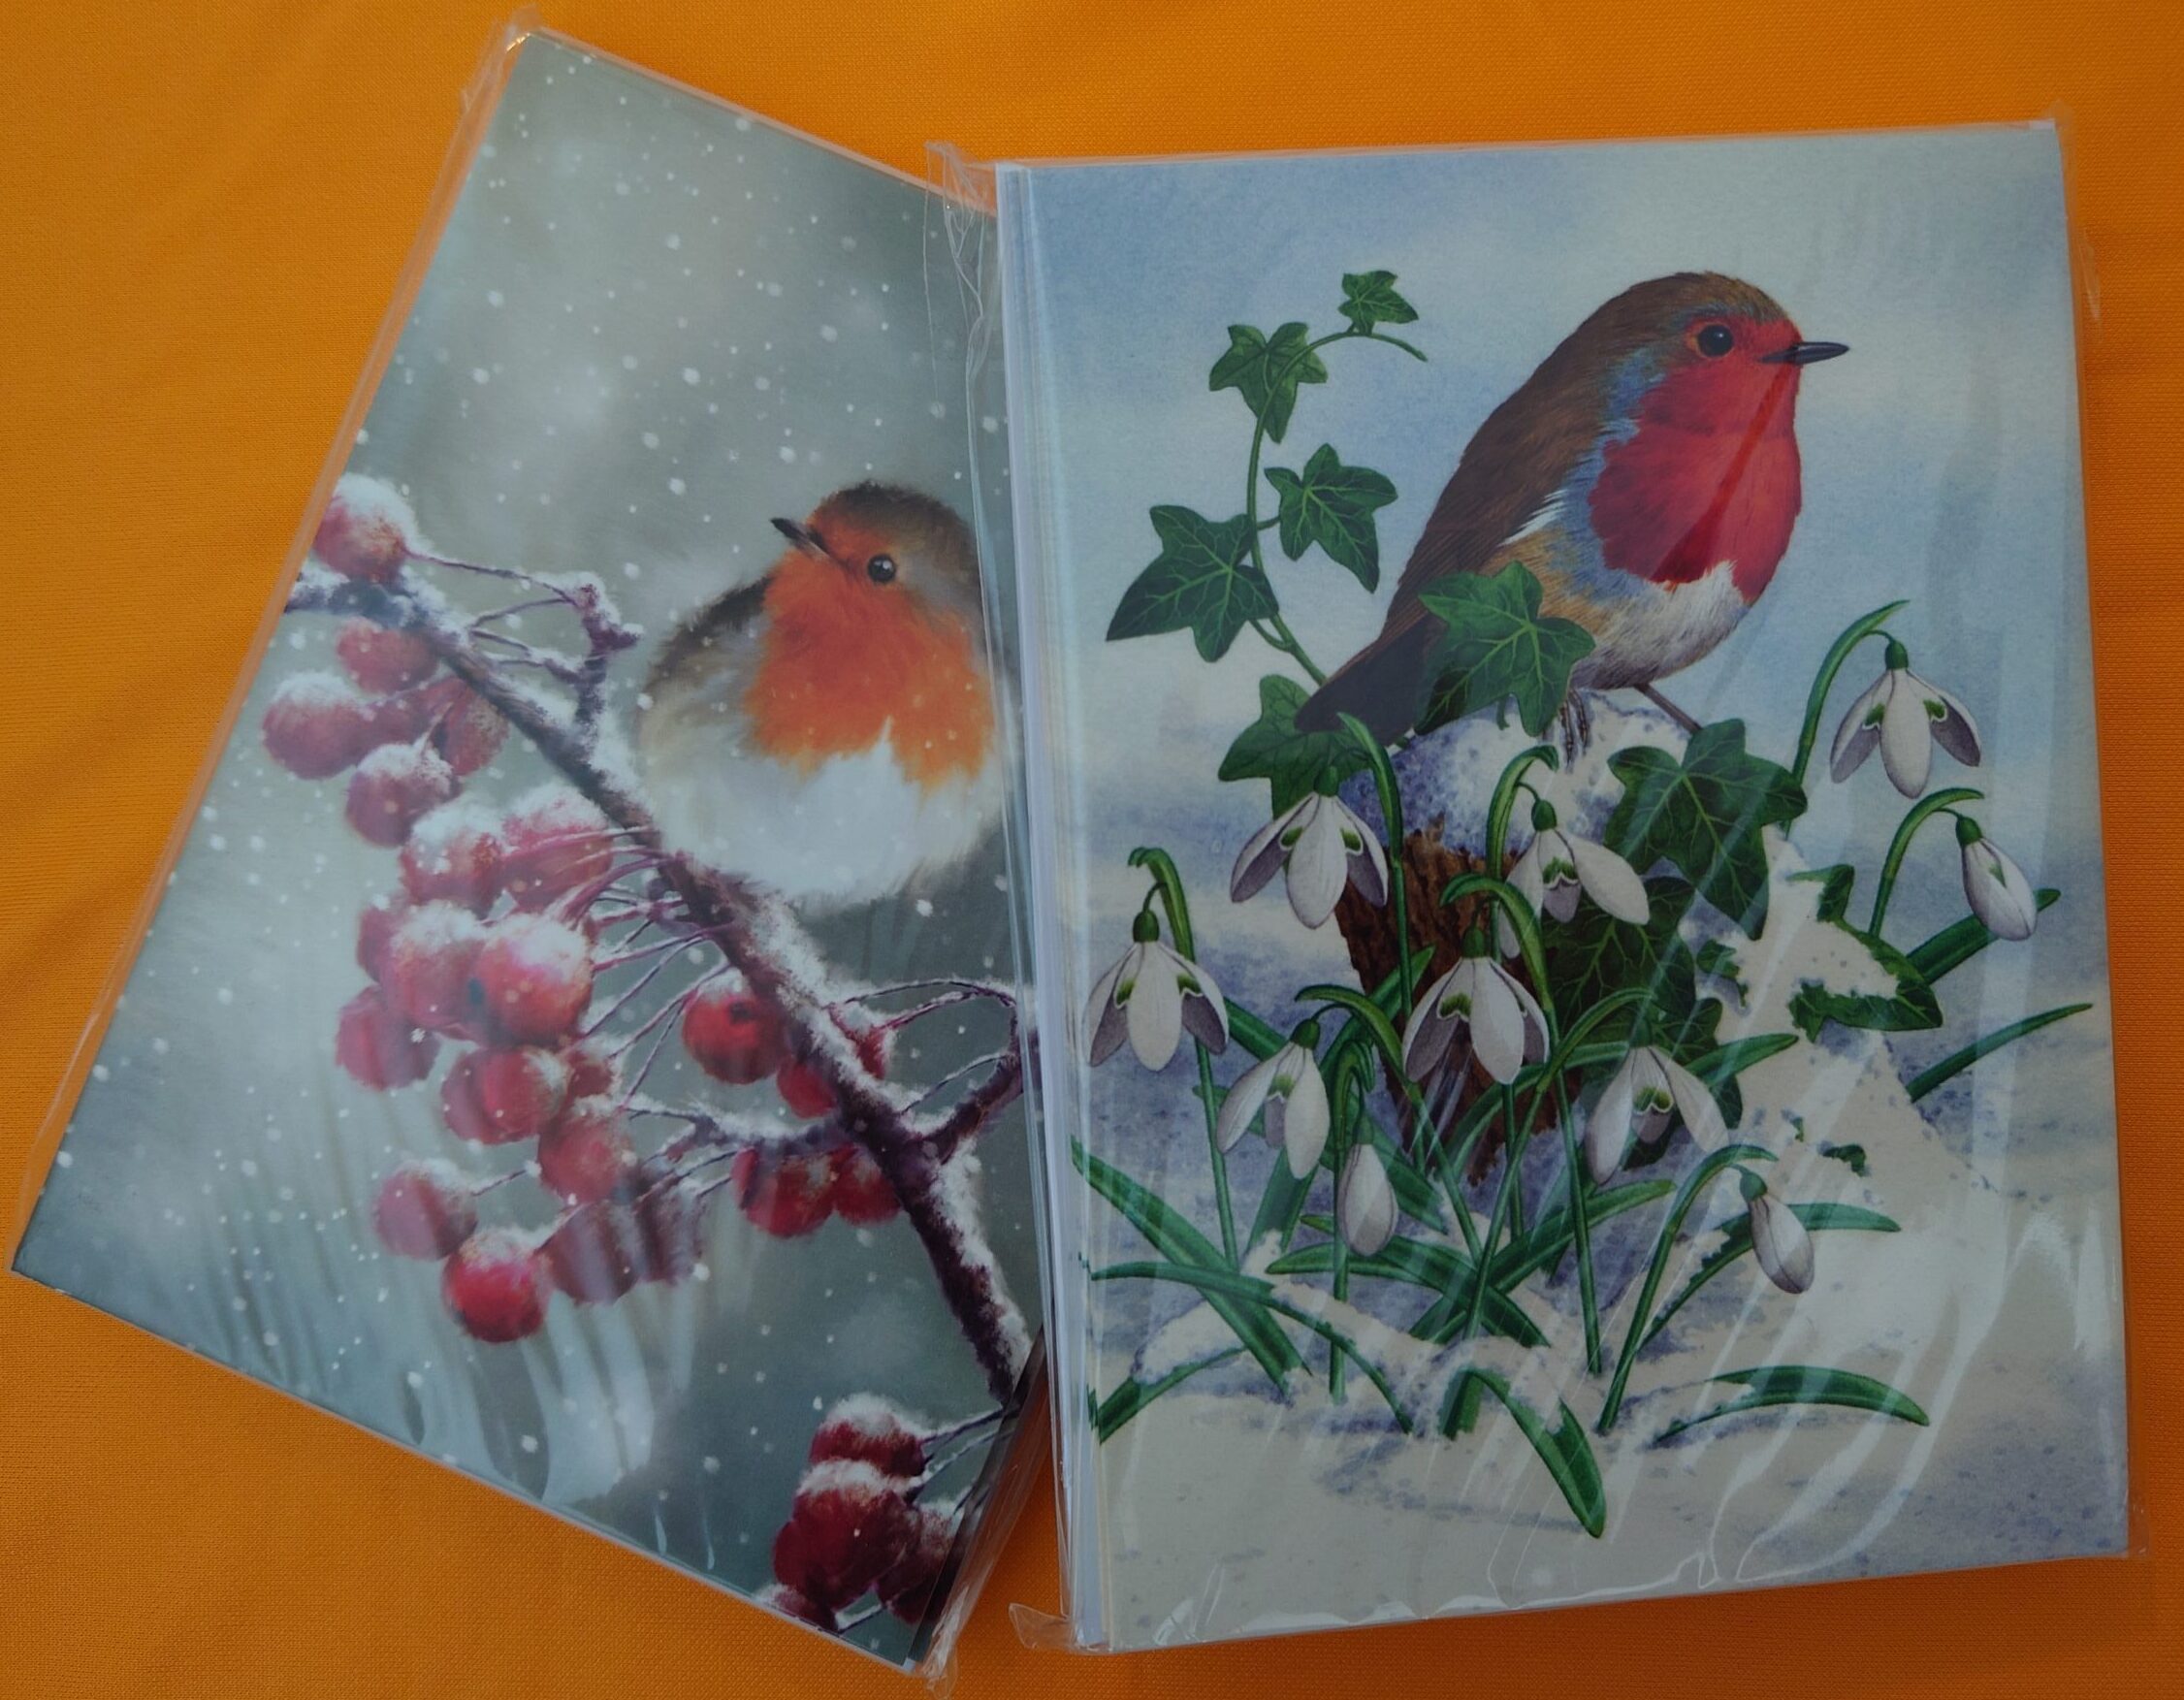 2 Christmas cards featuring Robins in a snowy scene